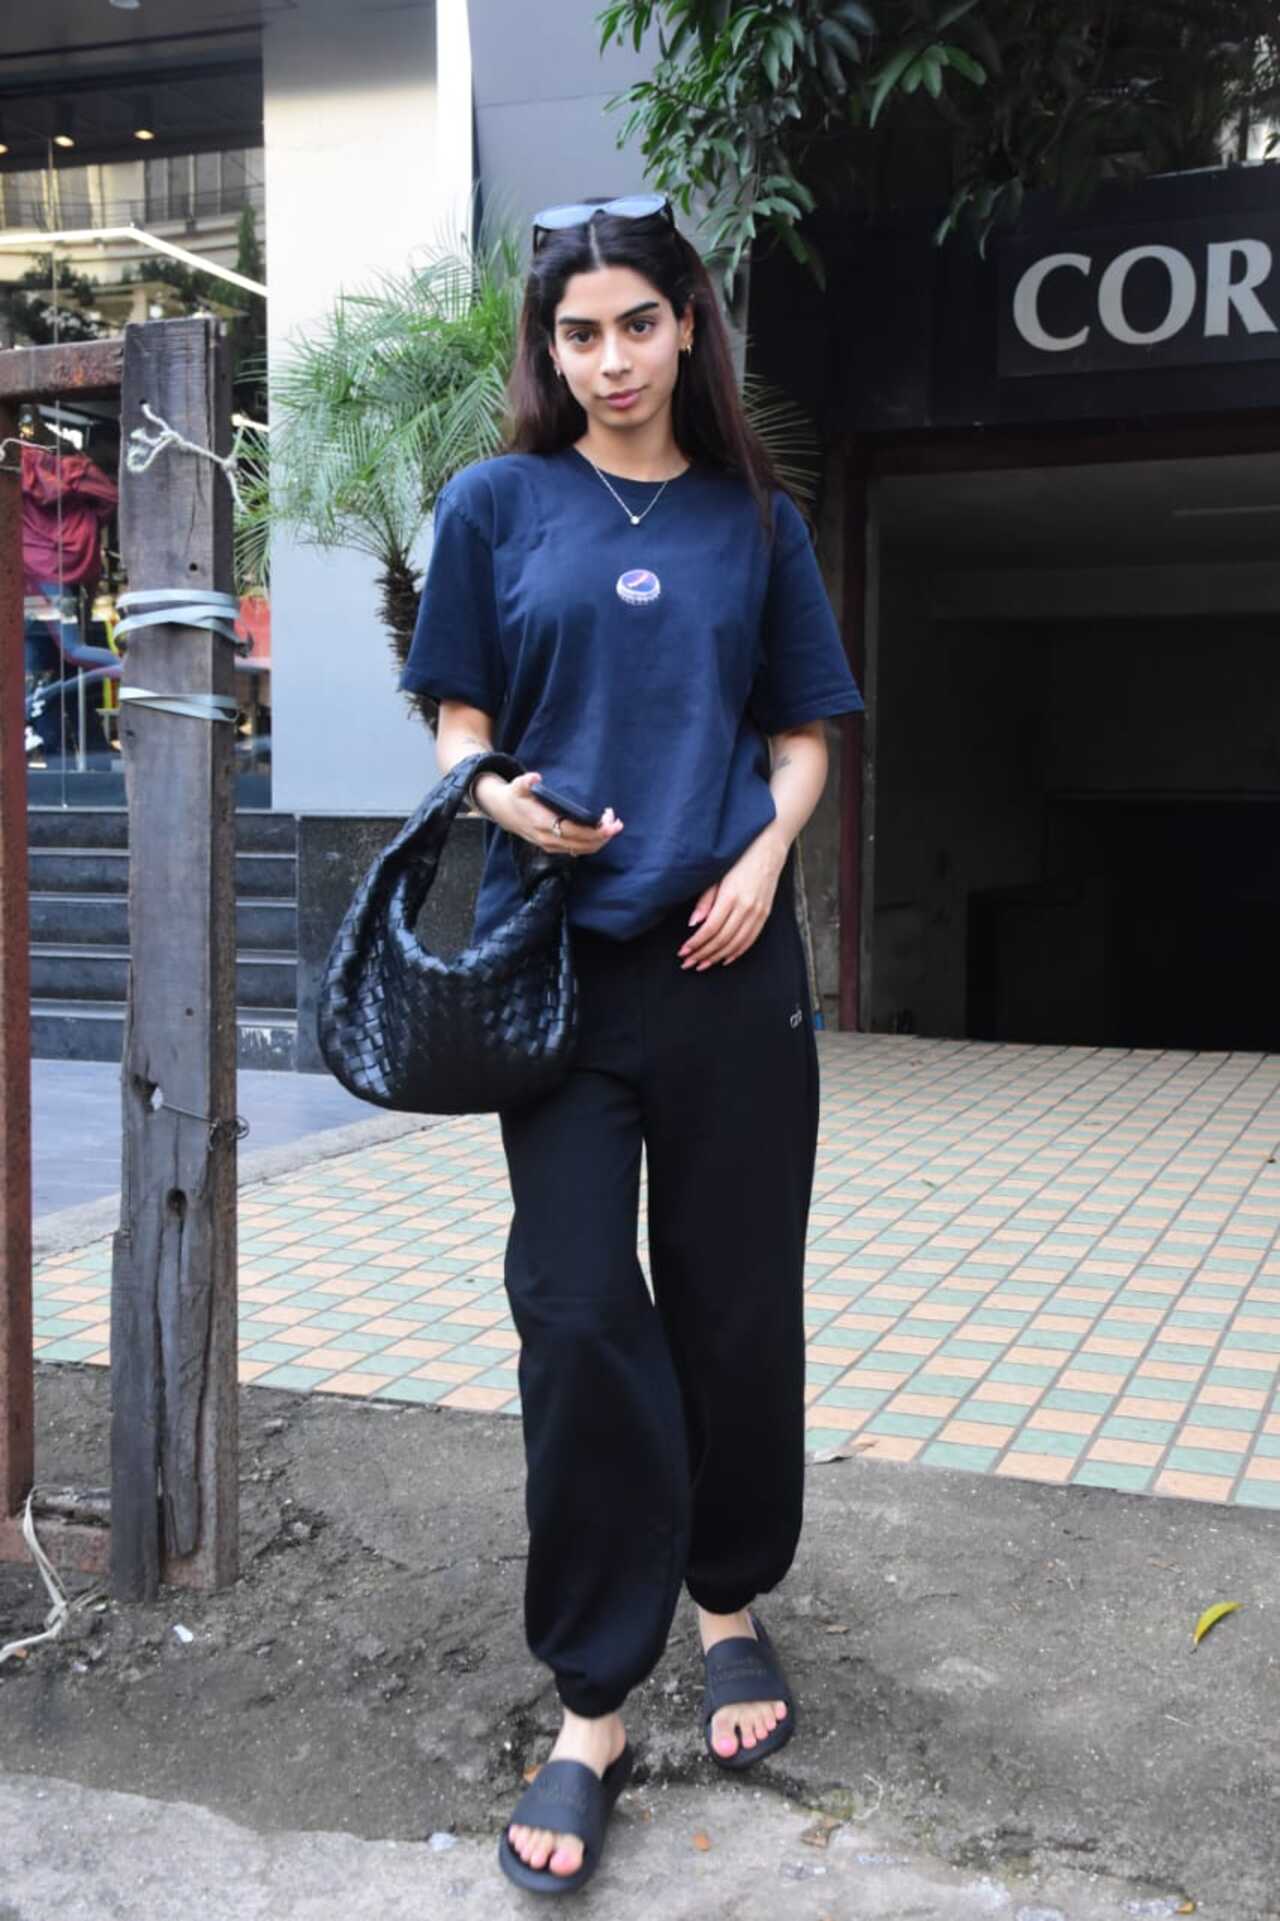 Khushi Kapoor stepped out in the city. She was dressed in a casual outfit